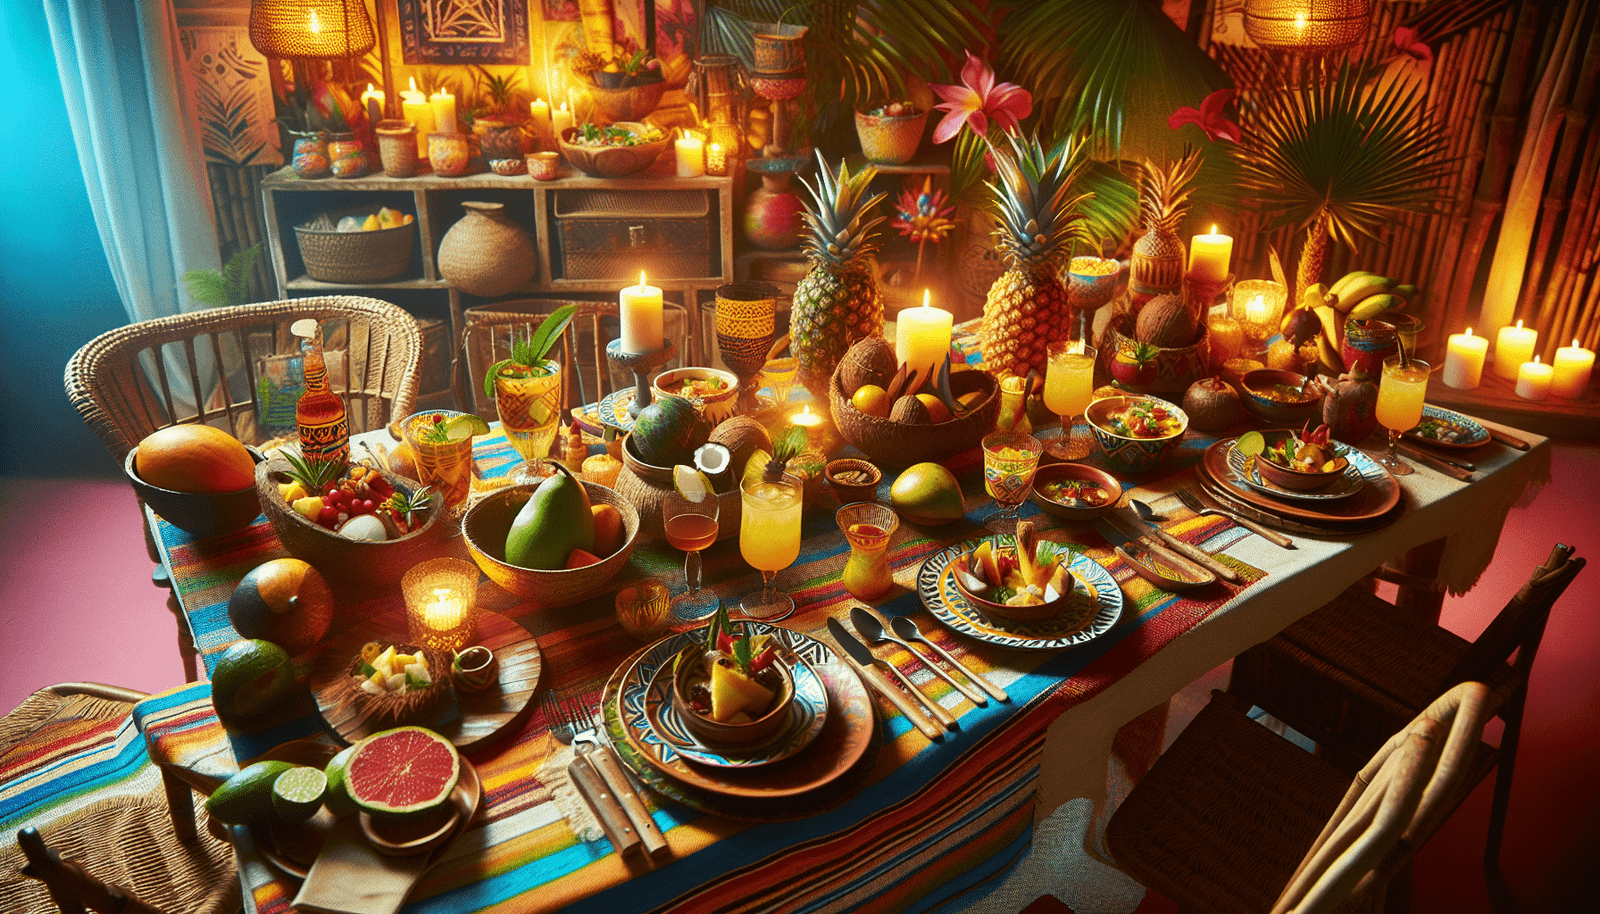 How To Cook For A Caribbean-themed Dinner Party